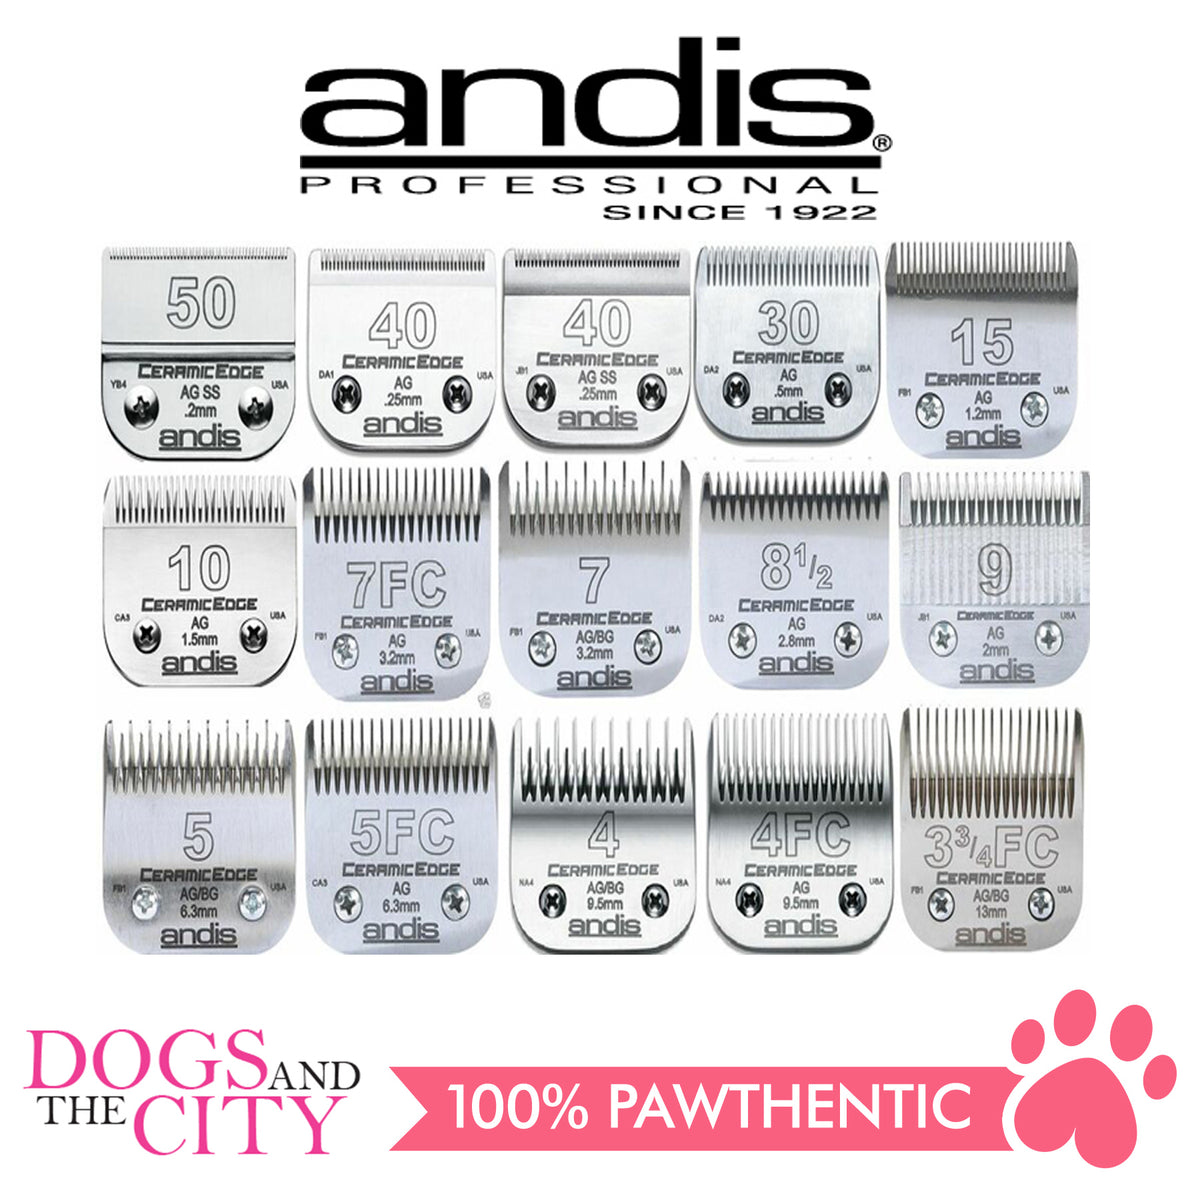 ANDIS UltraEdge® Detachable Blade, Size 7FC Dogs And The City Online